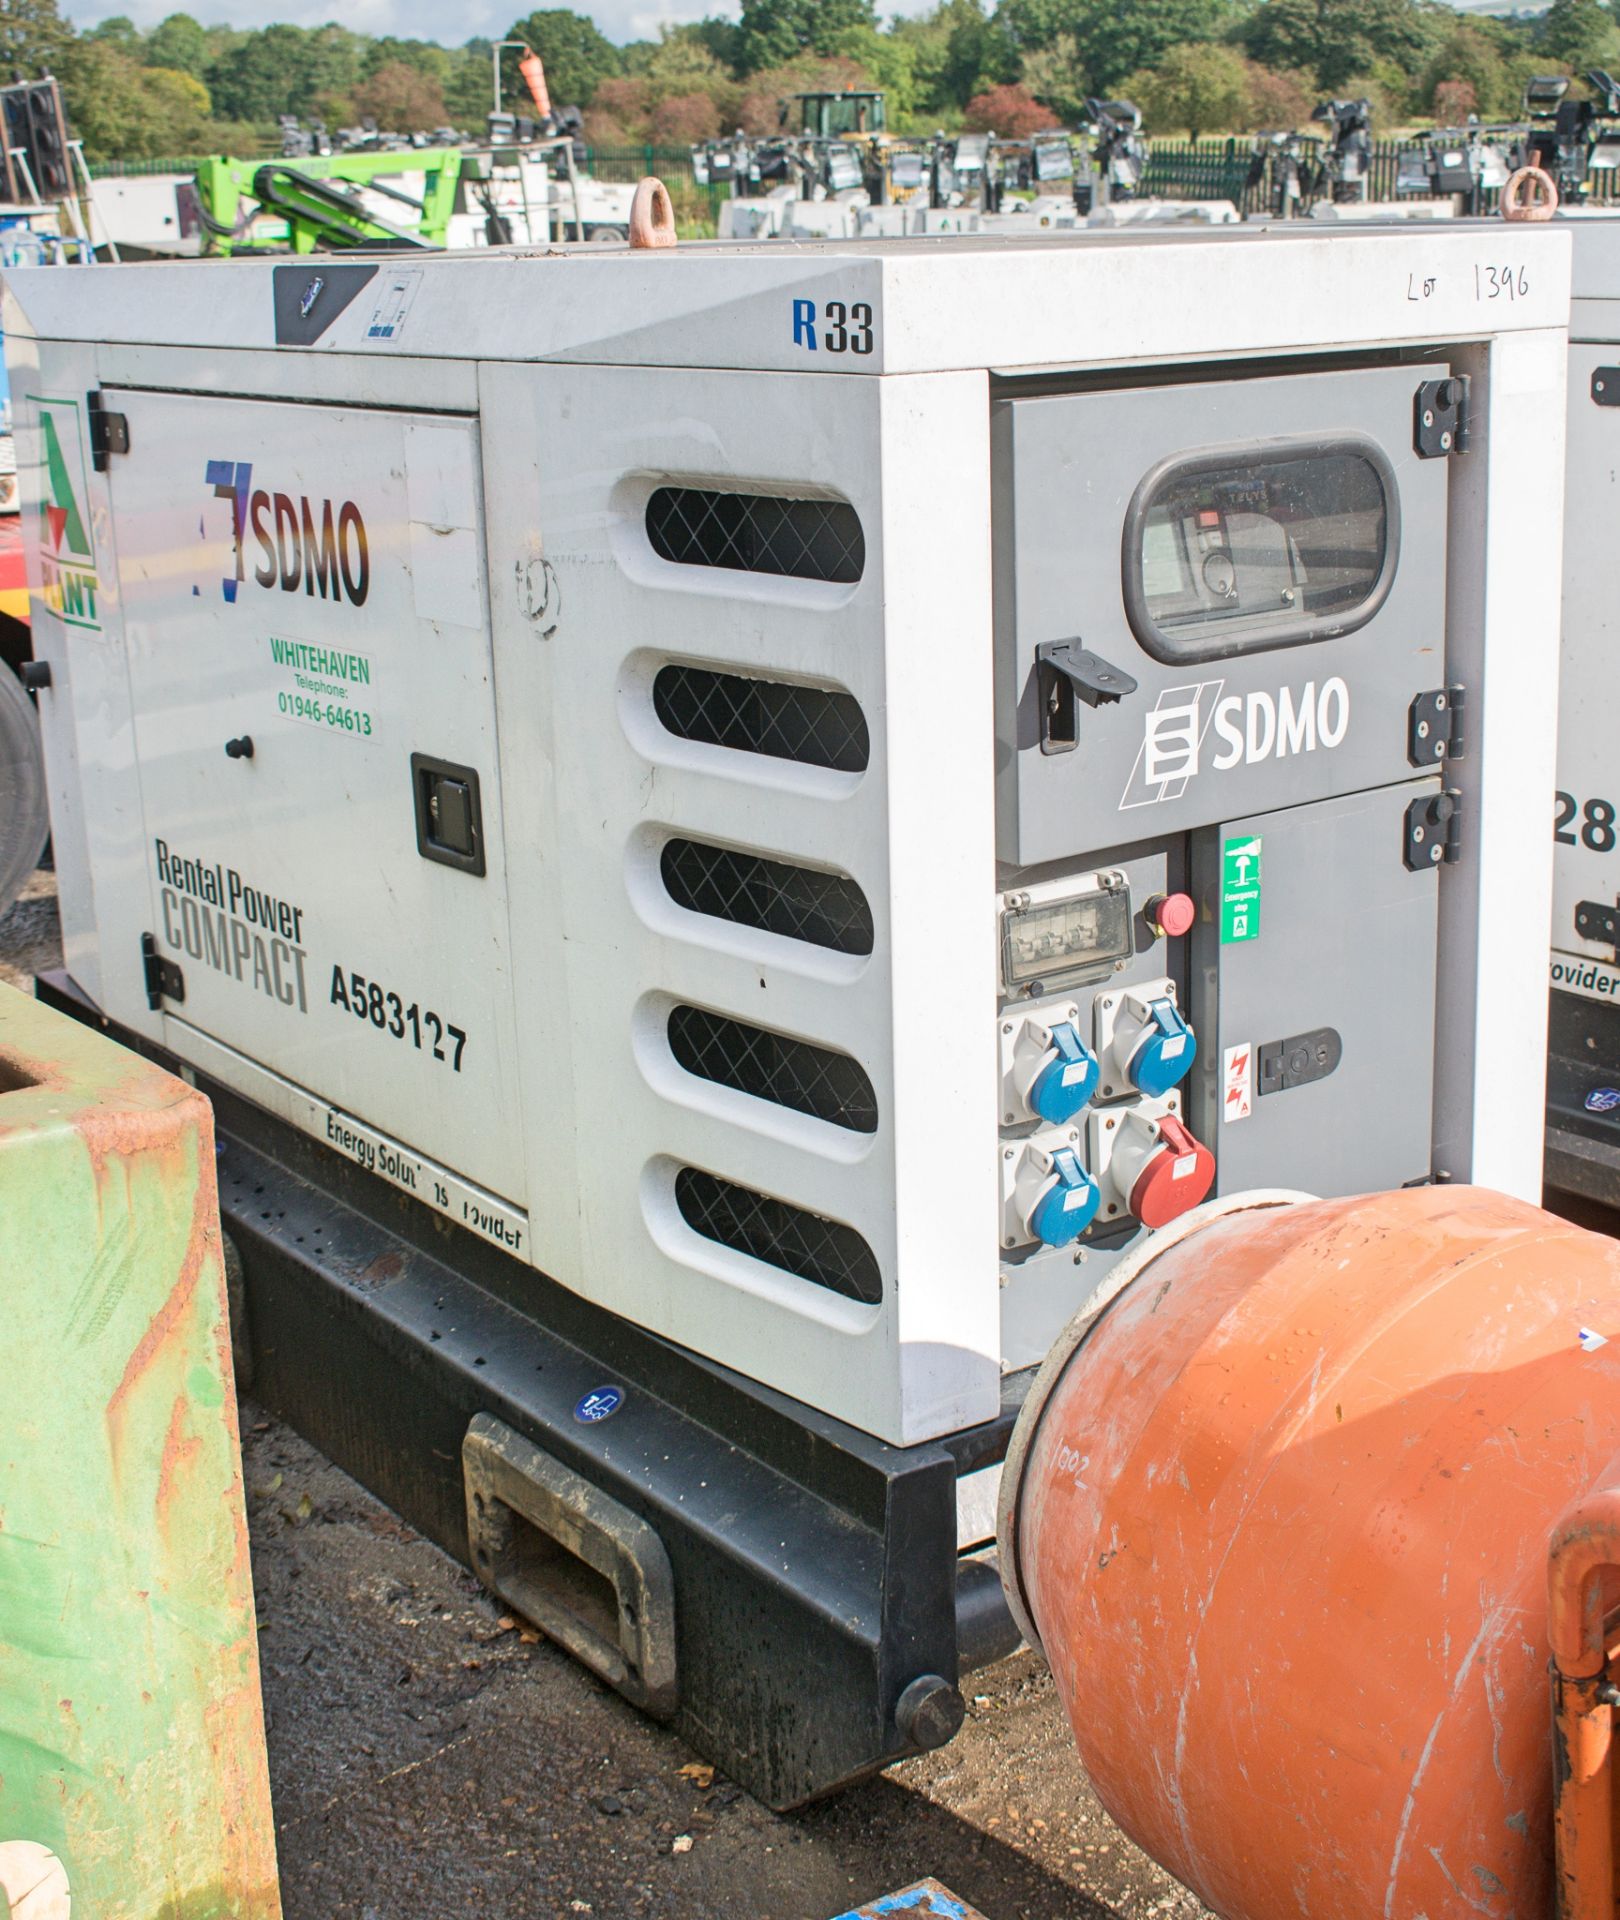 SDMO R33 33 kva diesel driven generator Year: 2012 S/N: 312007927 Recorded Hours: 27,411 A583127 - Image 4 of 7